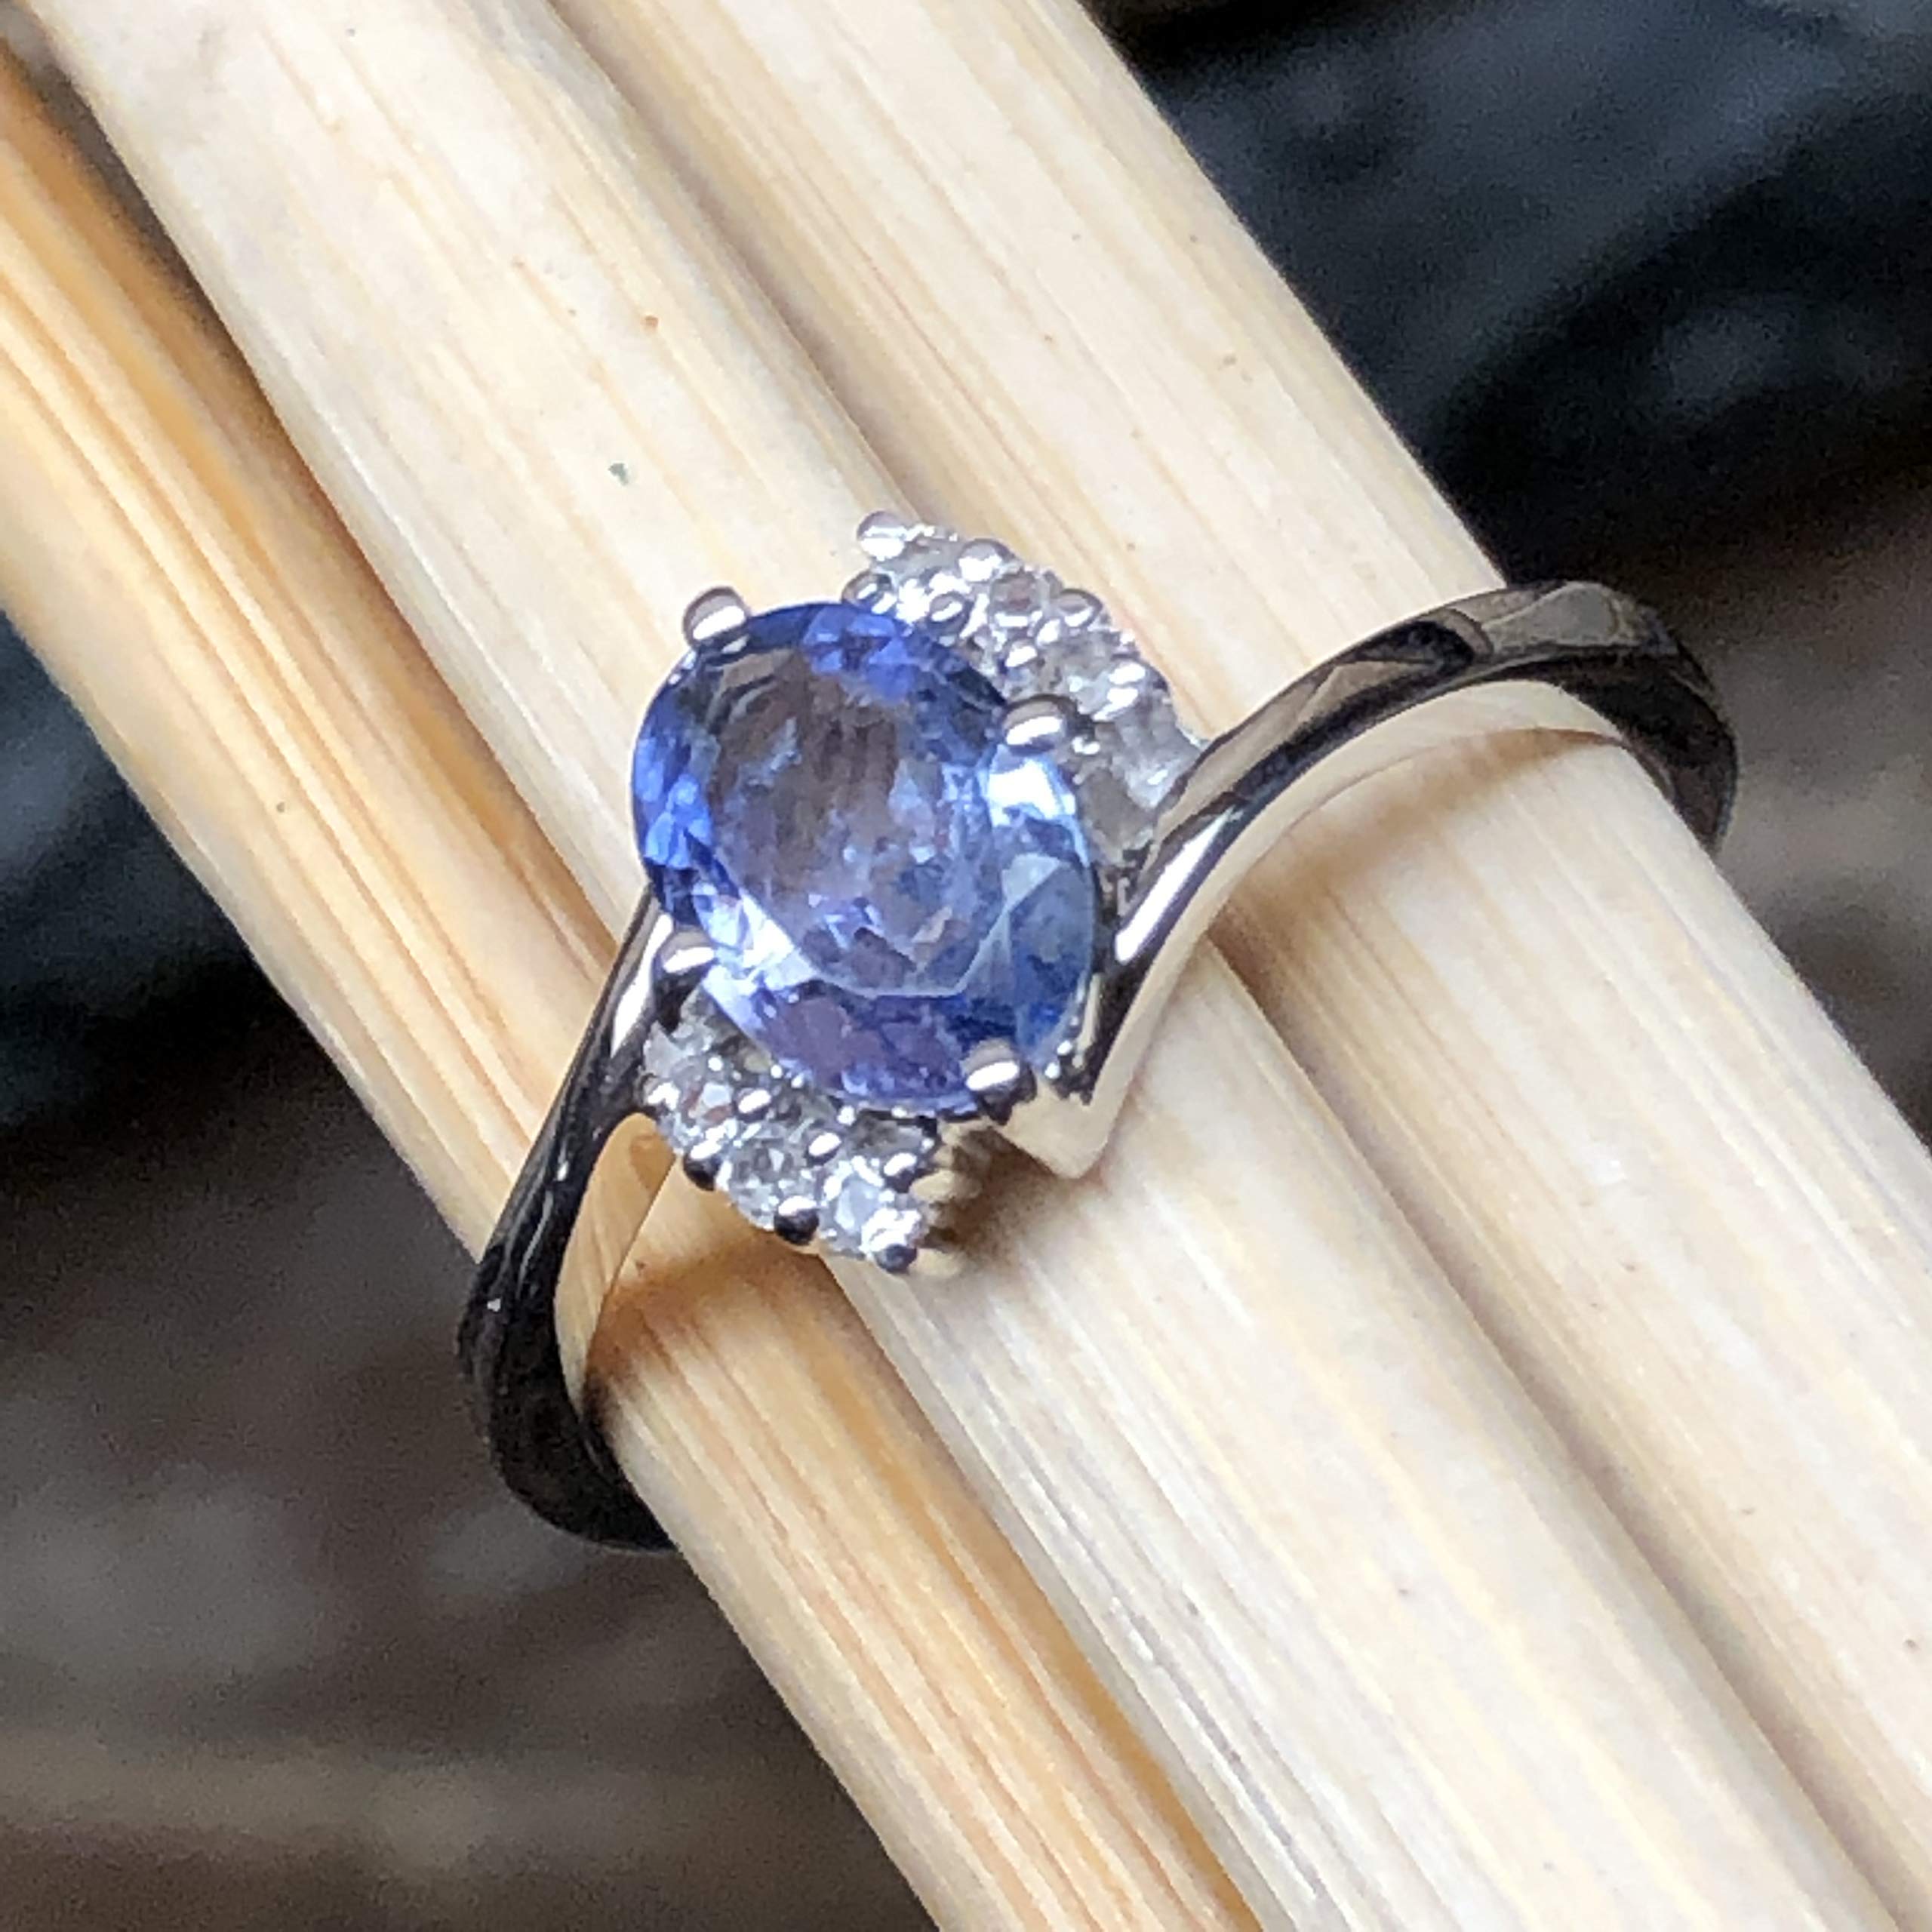 Genuine Blue Tanzanite, White Topaz 925 Solid Sterling Silver Engagement Ring Size 6, 7, 8, 9 - Natural Rocks by Kala